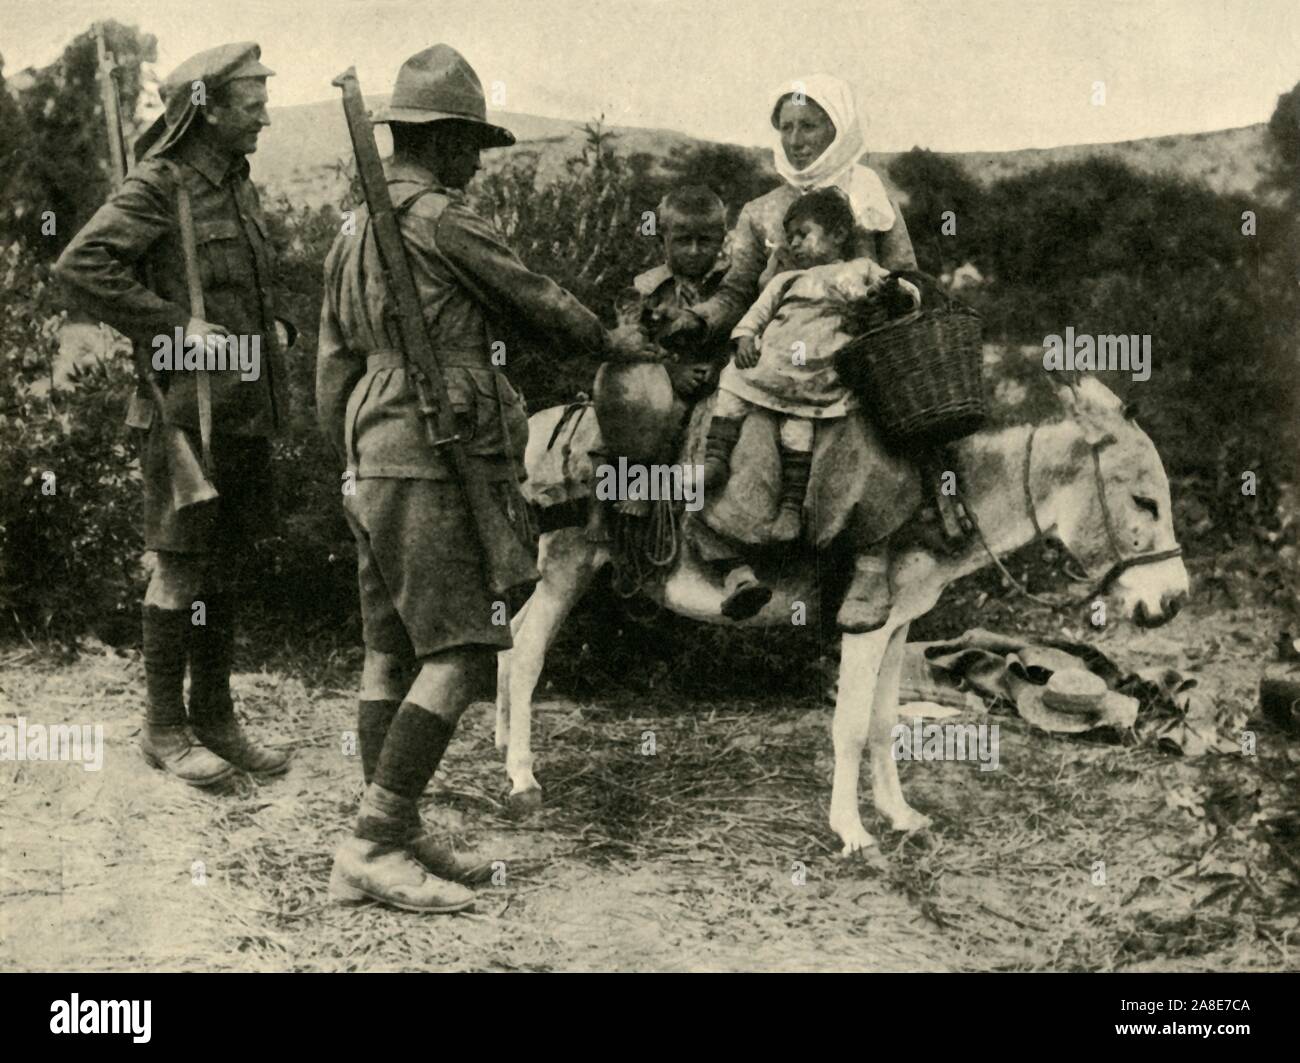 Australian soldier giving water to a Turkish family, First World War, 1915-1916, (c1920). 'A Dardanelle Idyll: Australian giving a drink of water to a Turkish peasant woman above Anzac Cove', on the Gallipoli peninsula in Turkey. From &quot;The Great World War: A History&quot;, Volume V, edited by Frank A Mumby. [The Gresham Publishing Company Ltd, London, c1920] Stock Photo